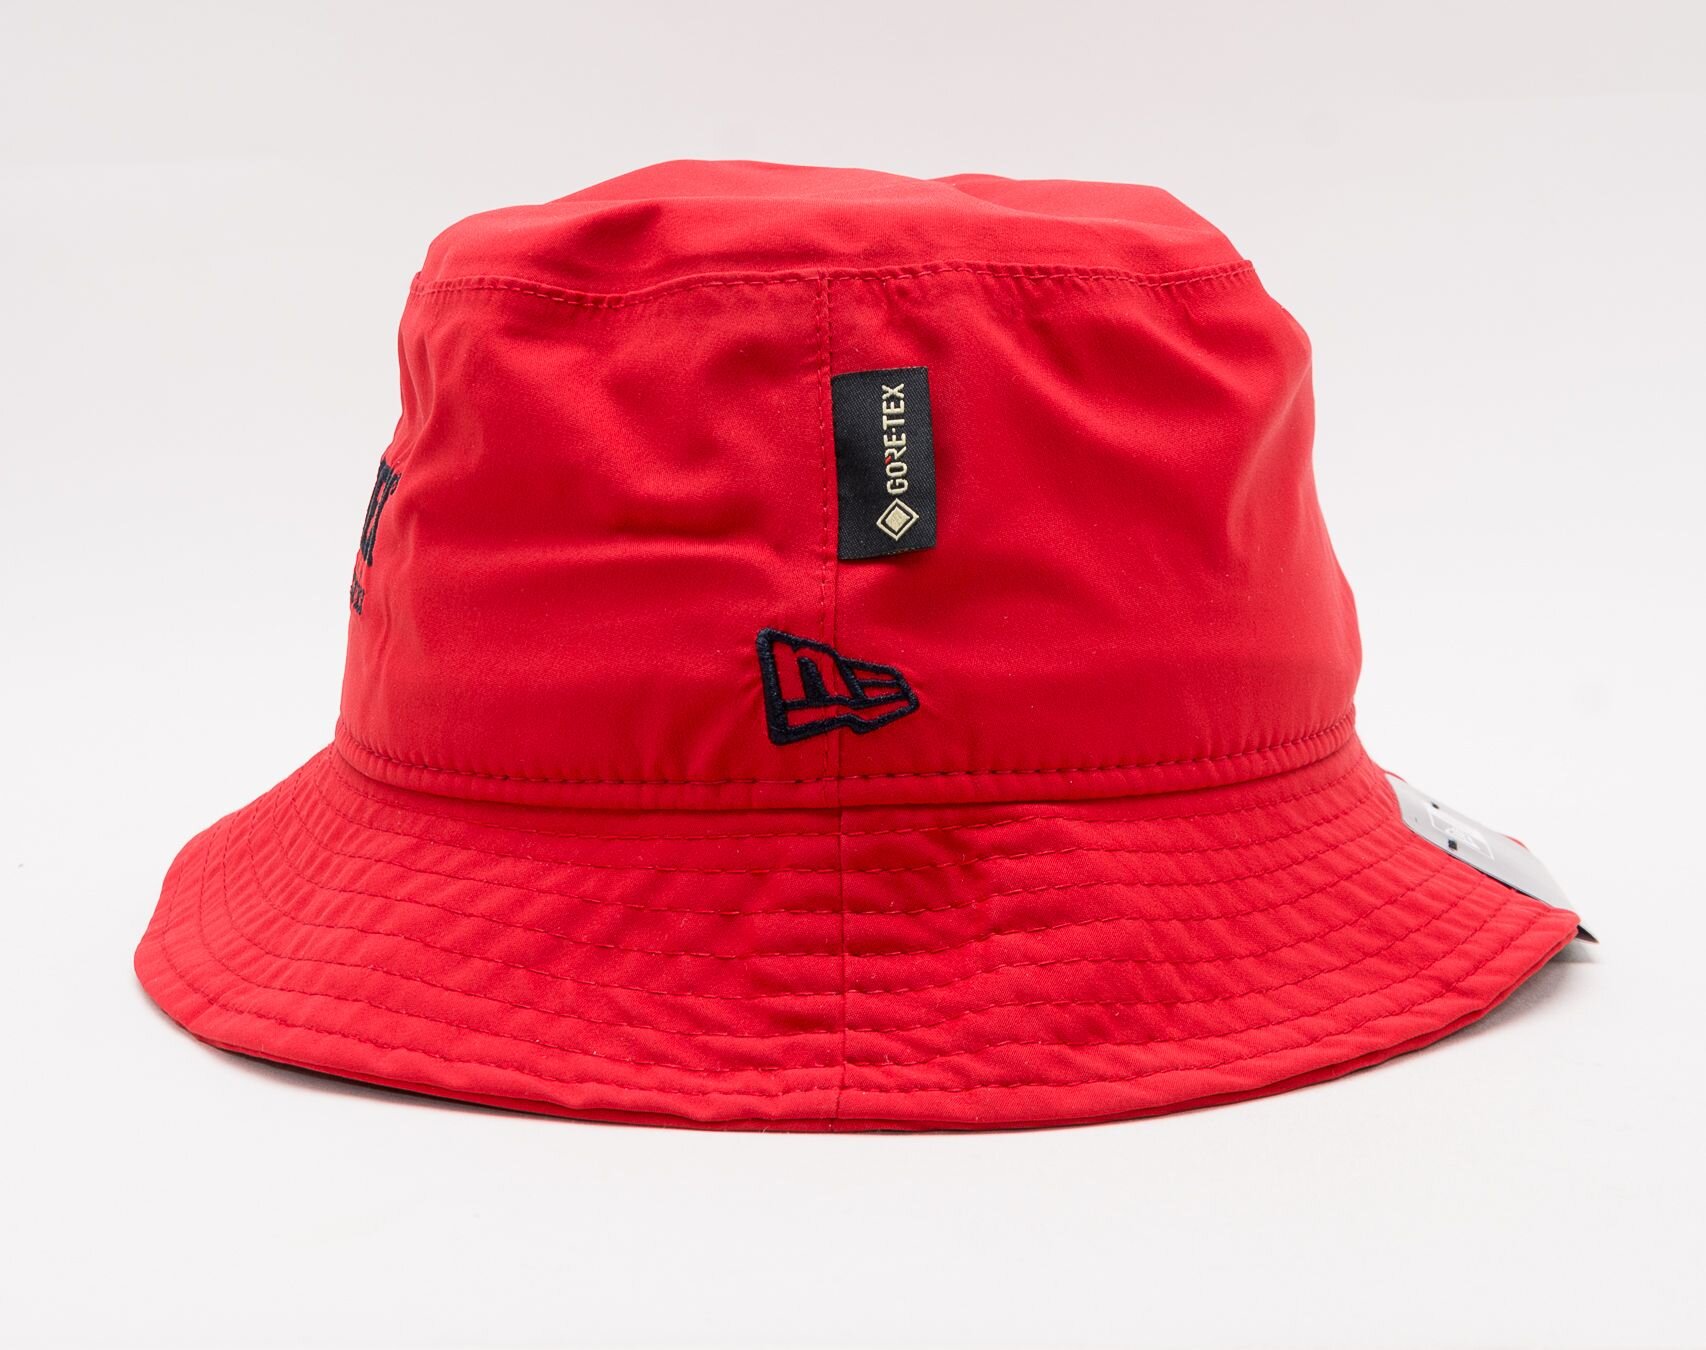 Official New Era Essential Tapered Black Bucket Hat